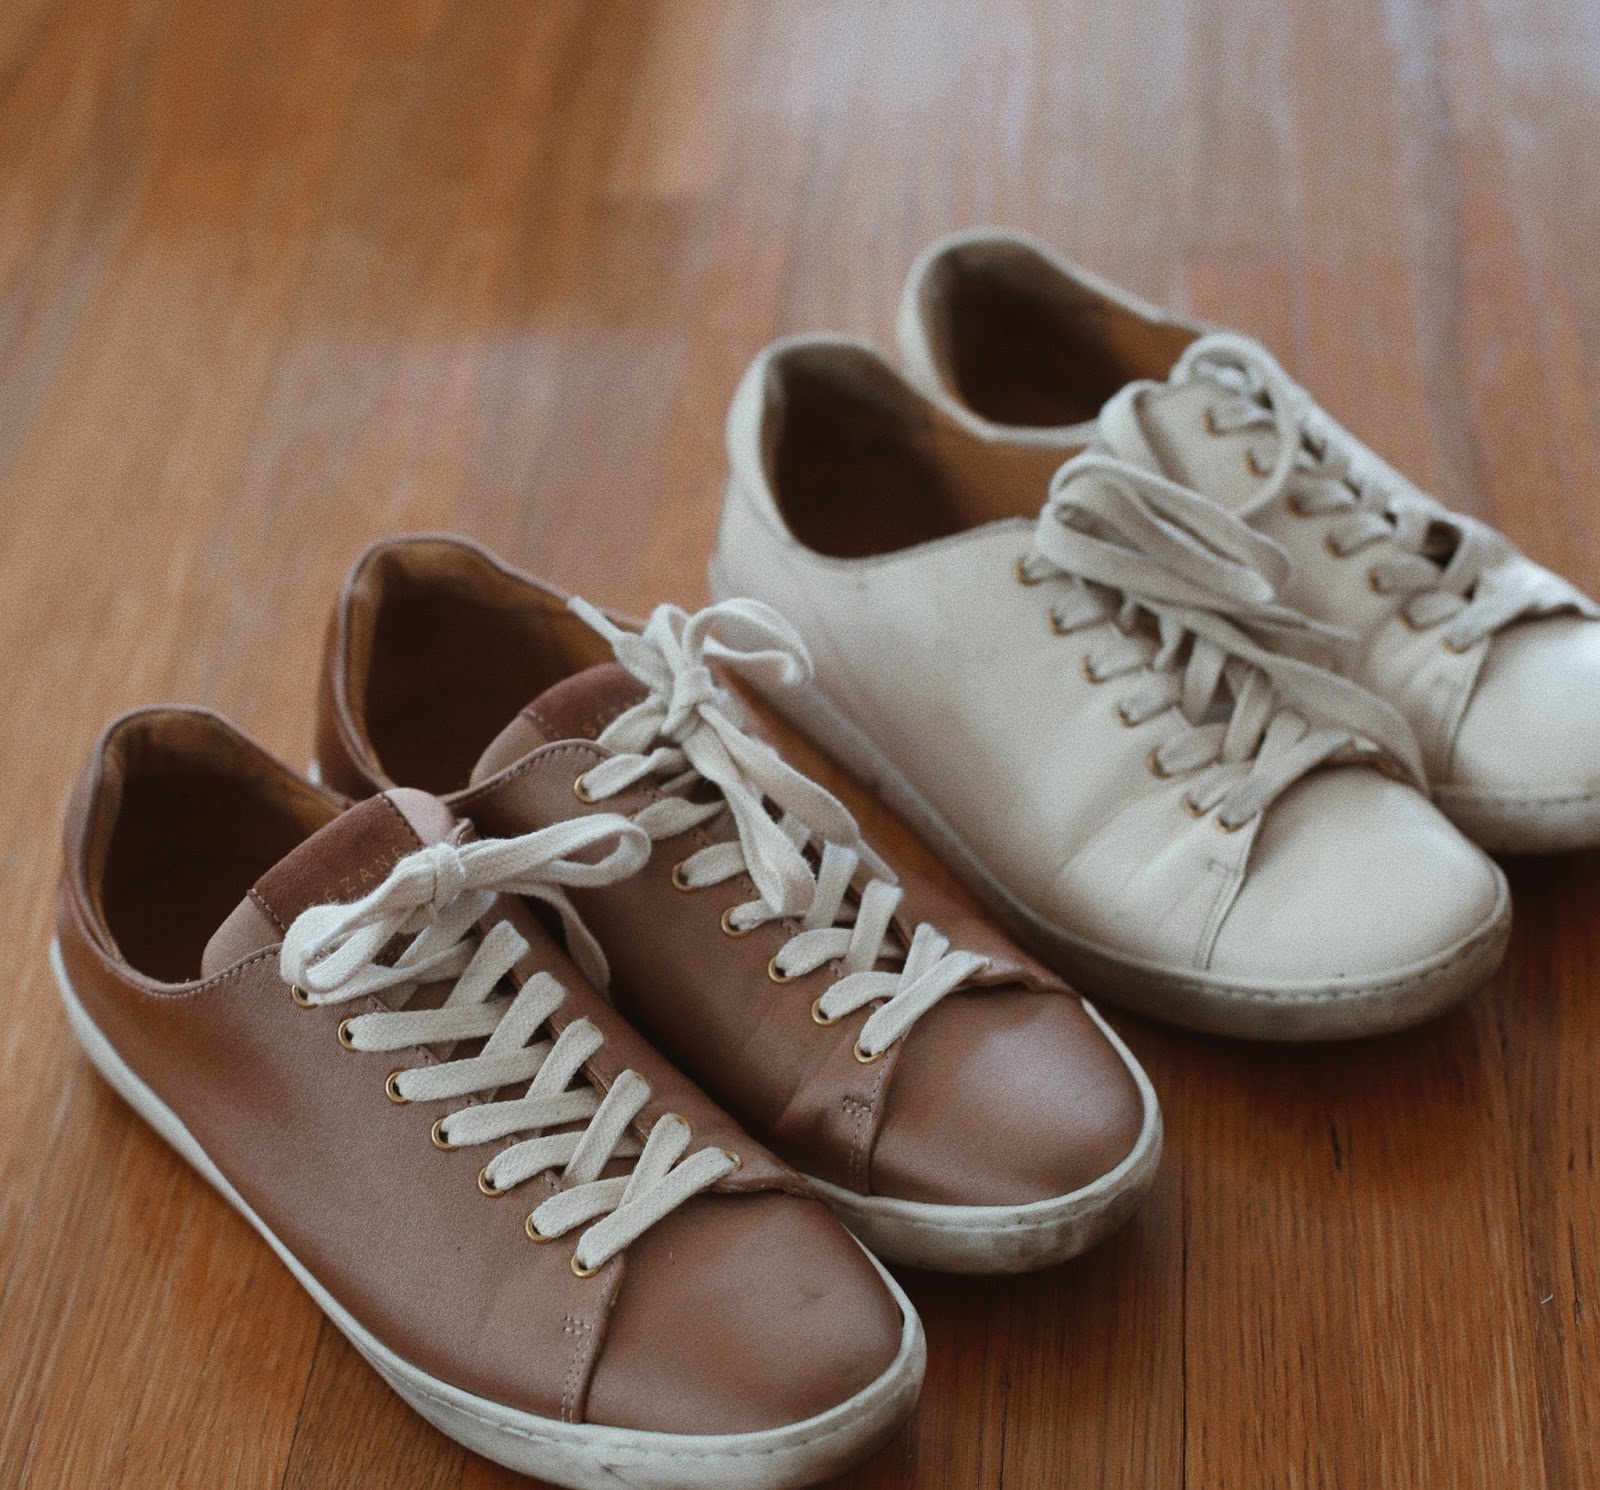 Sneakers (For the Girl who Doesn’t Like Sneakers) - Pretty Little Fawn